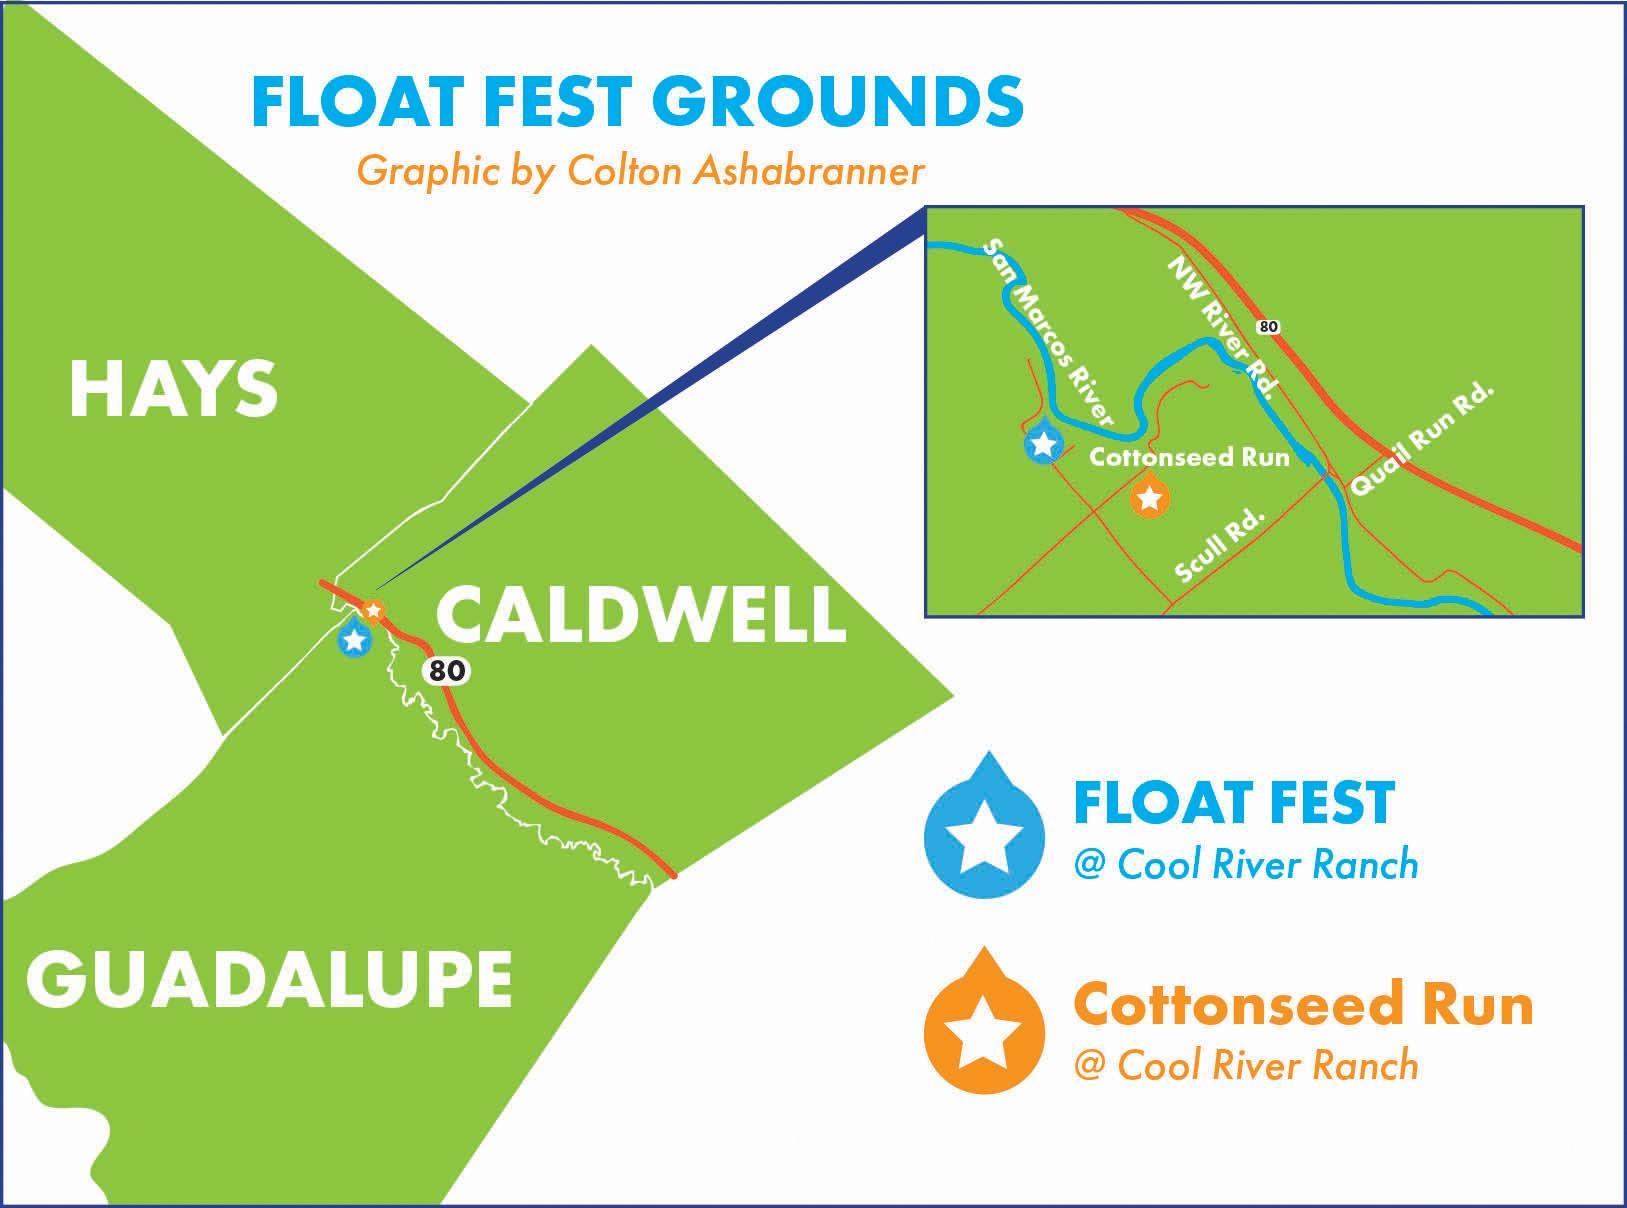 colton ashabranner, Float Fest, cool river ranch, hays county, guadalupe county, caldwell county, music festival, graphic design